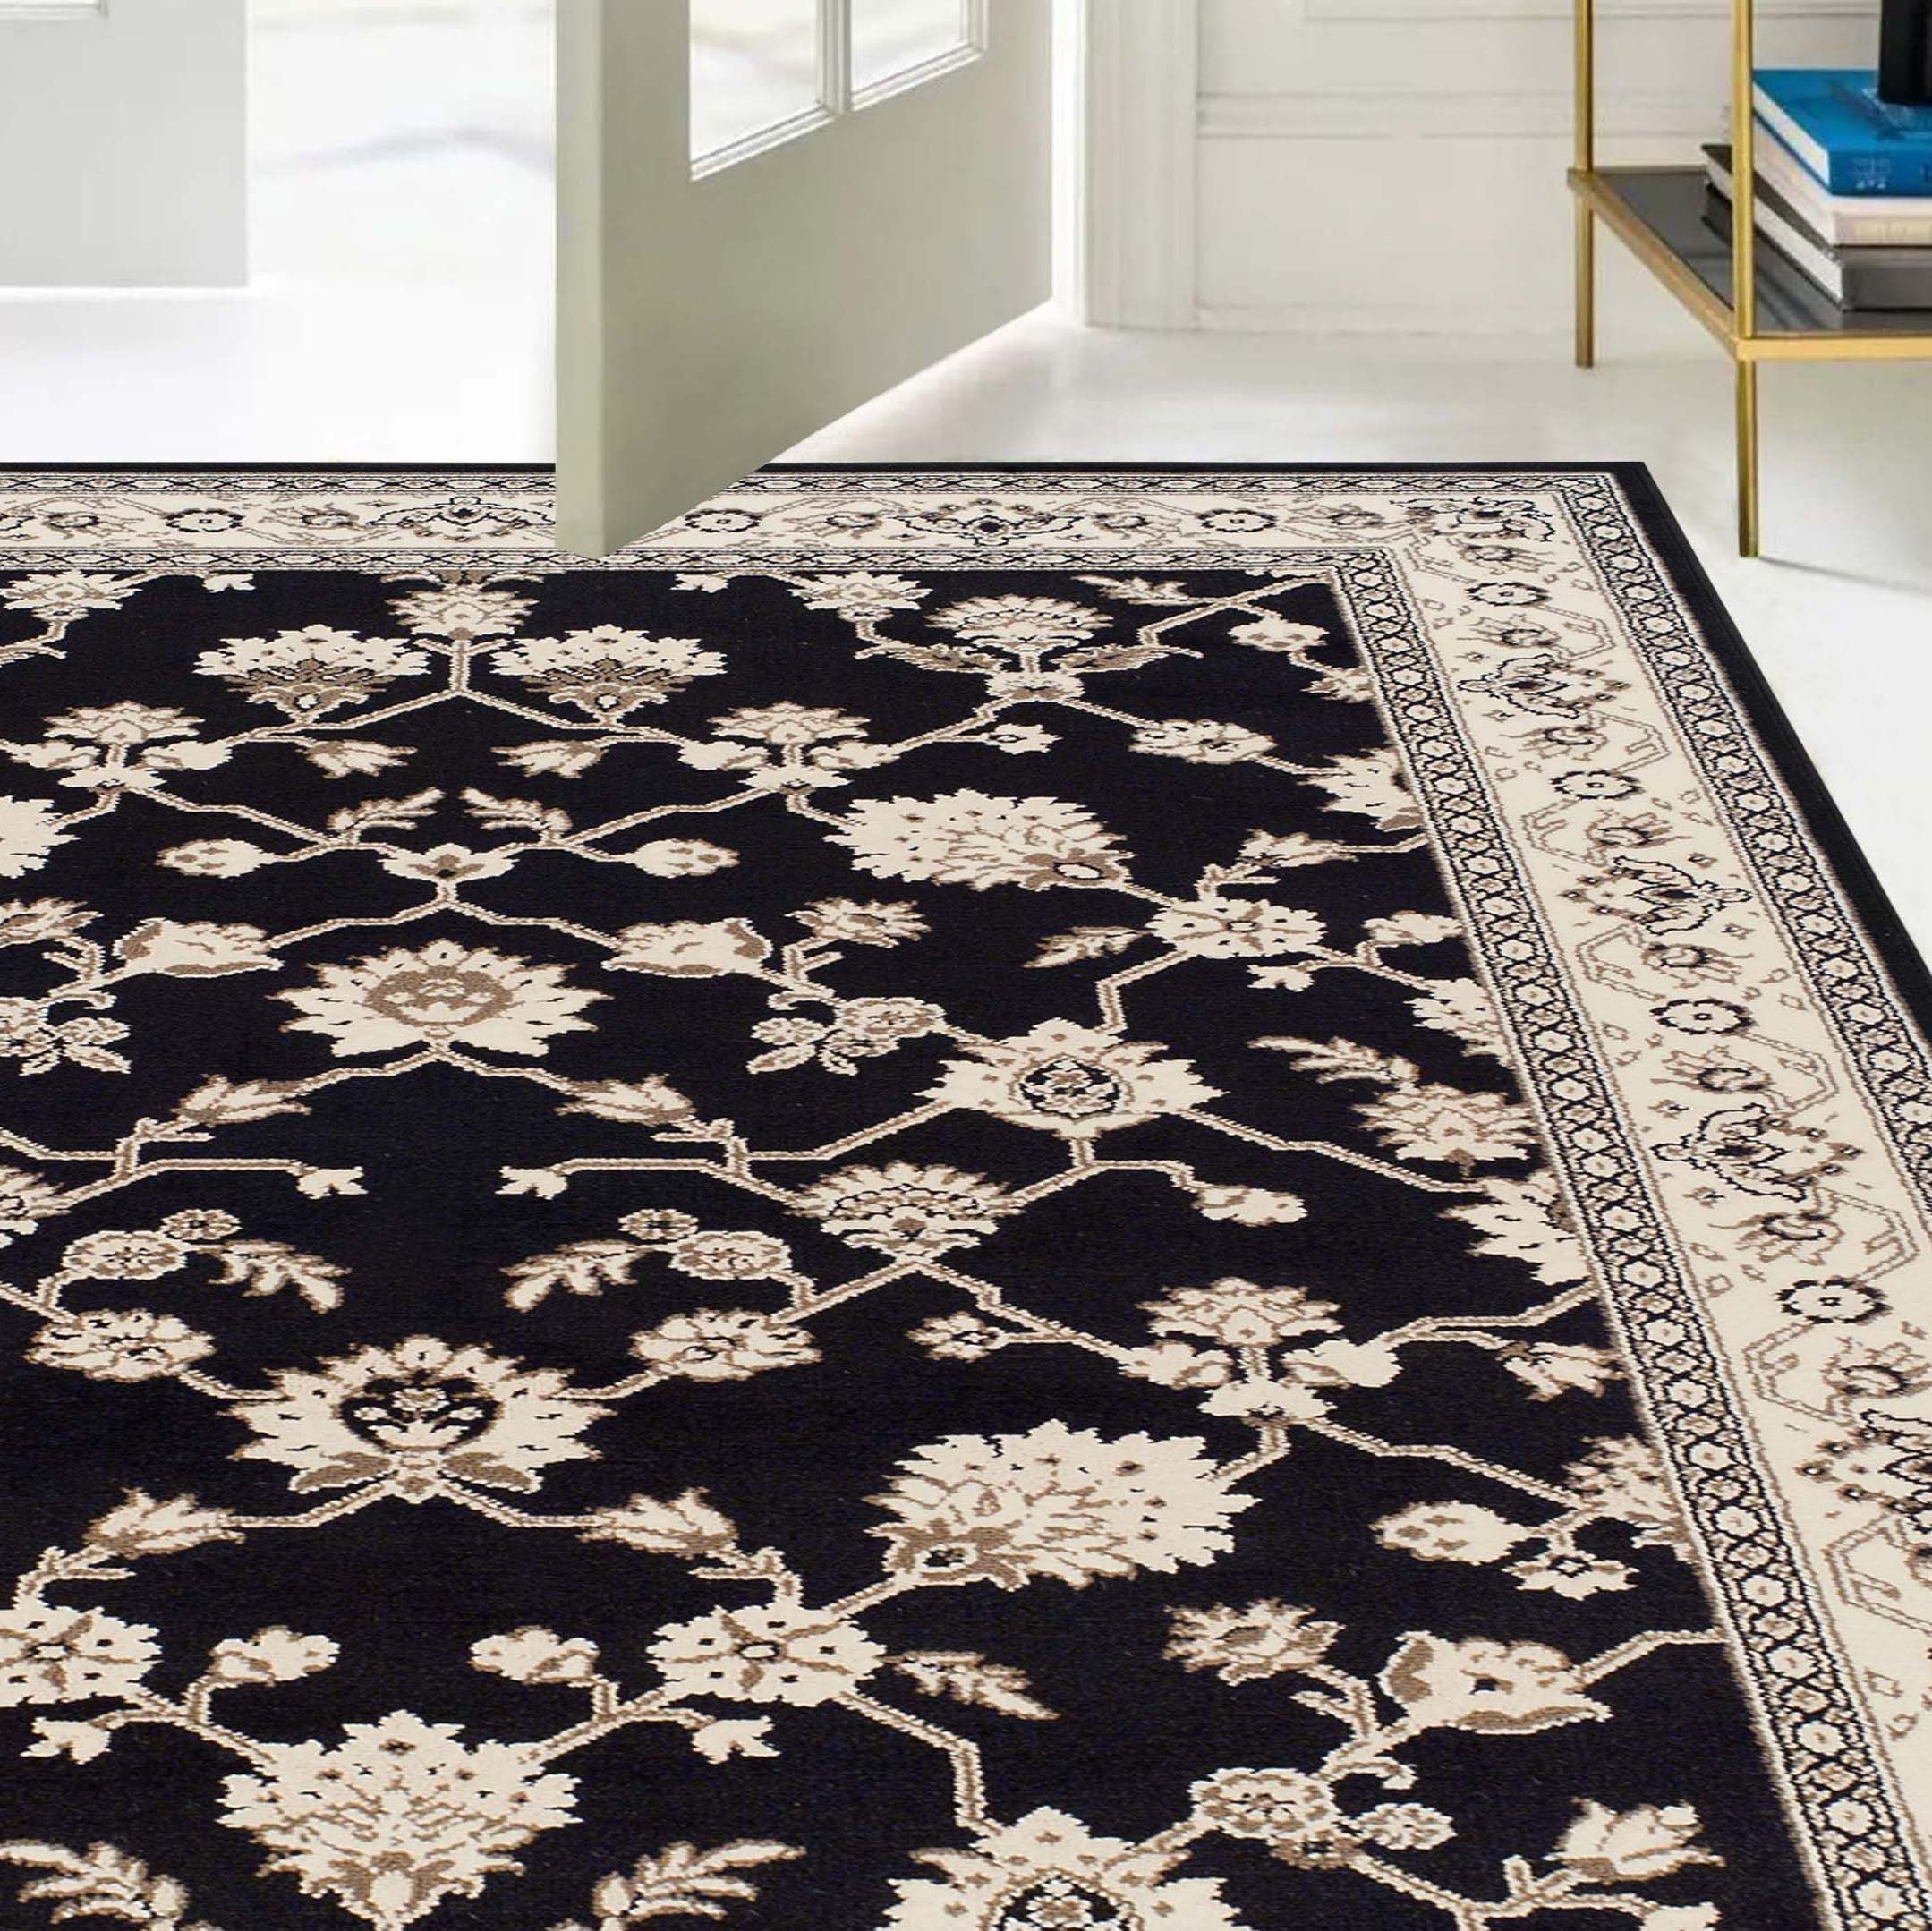 Kingfield Traditional Floral Indoor Area Rug, 8' x 10', Black - image 5 of 5